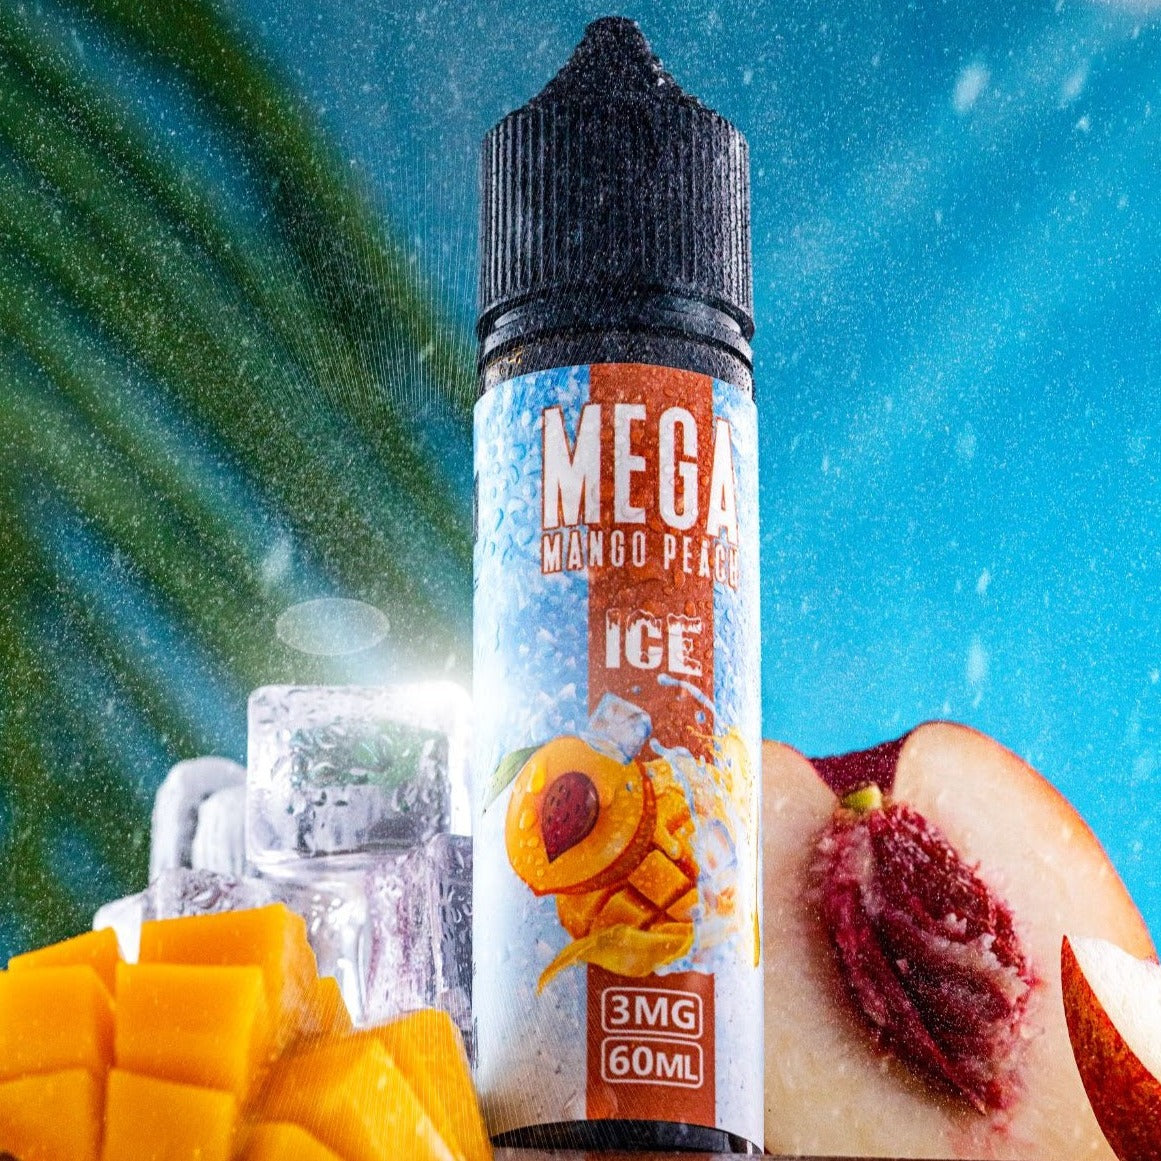 Mega Mango Peach Ice by GRAND - A Fusion of Mango, Peach, and Menthol for a Refreshing Vape Experience